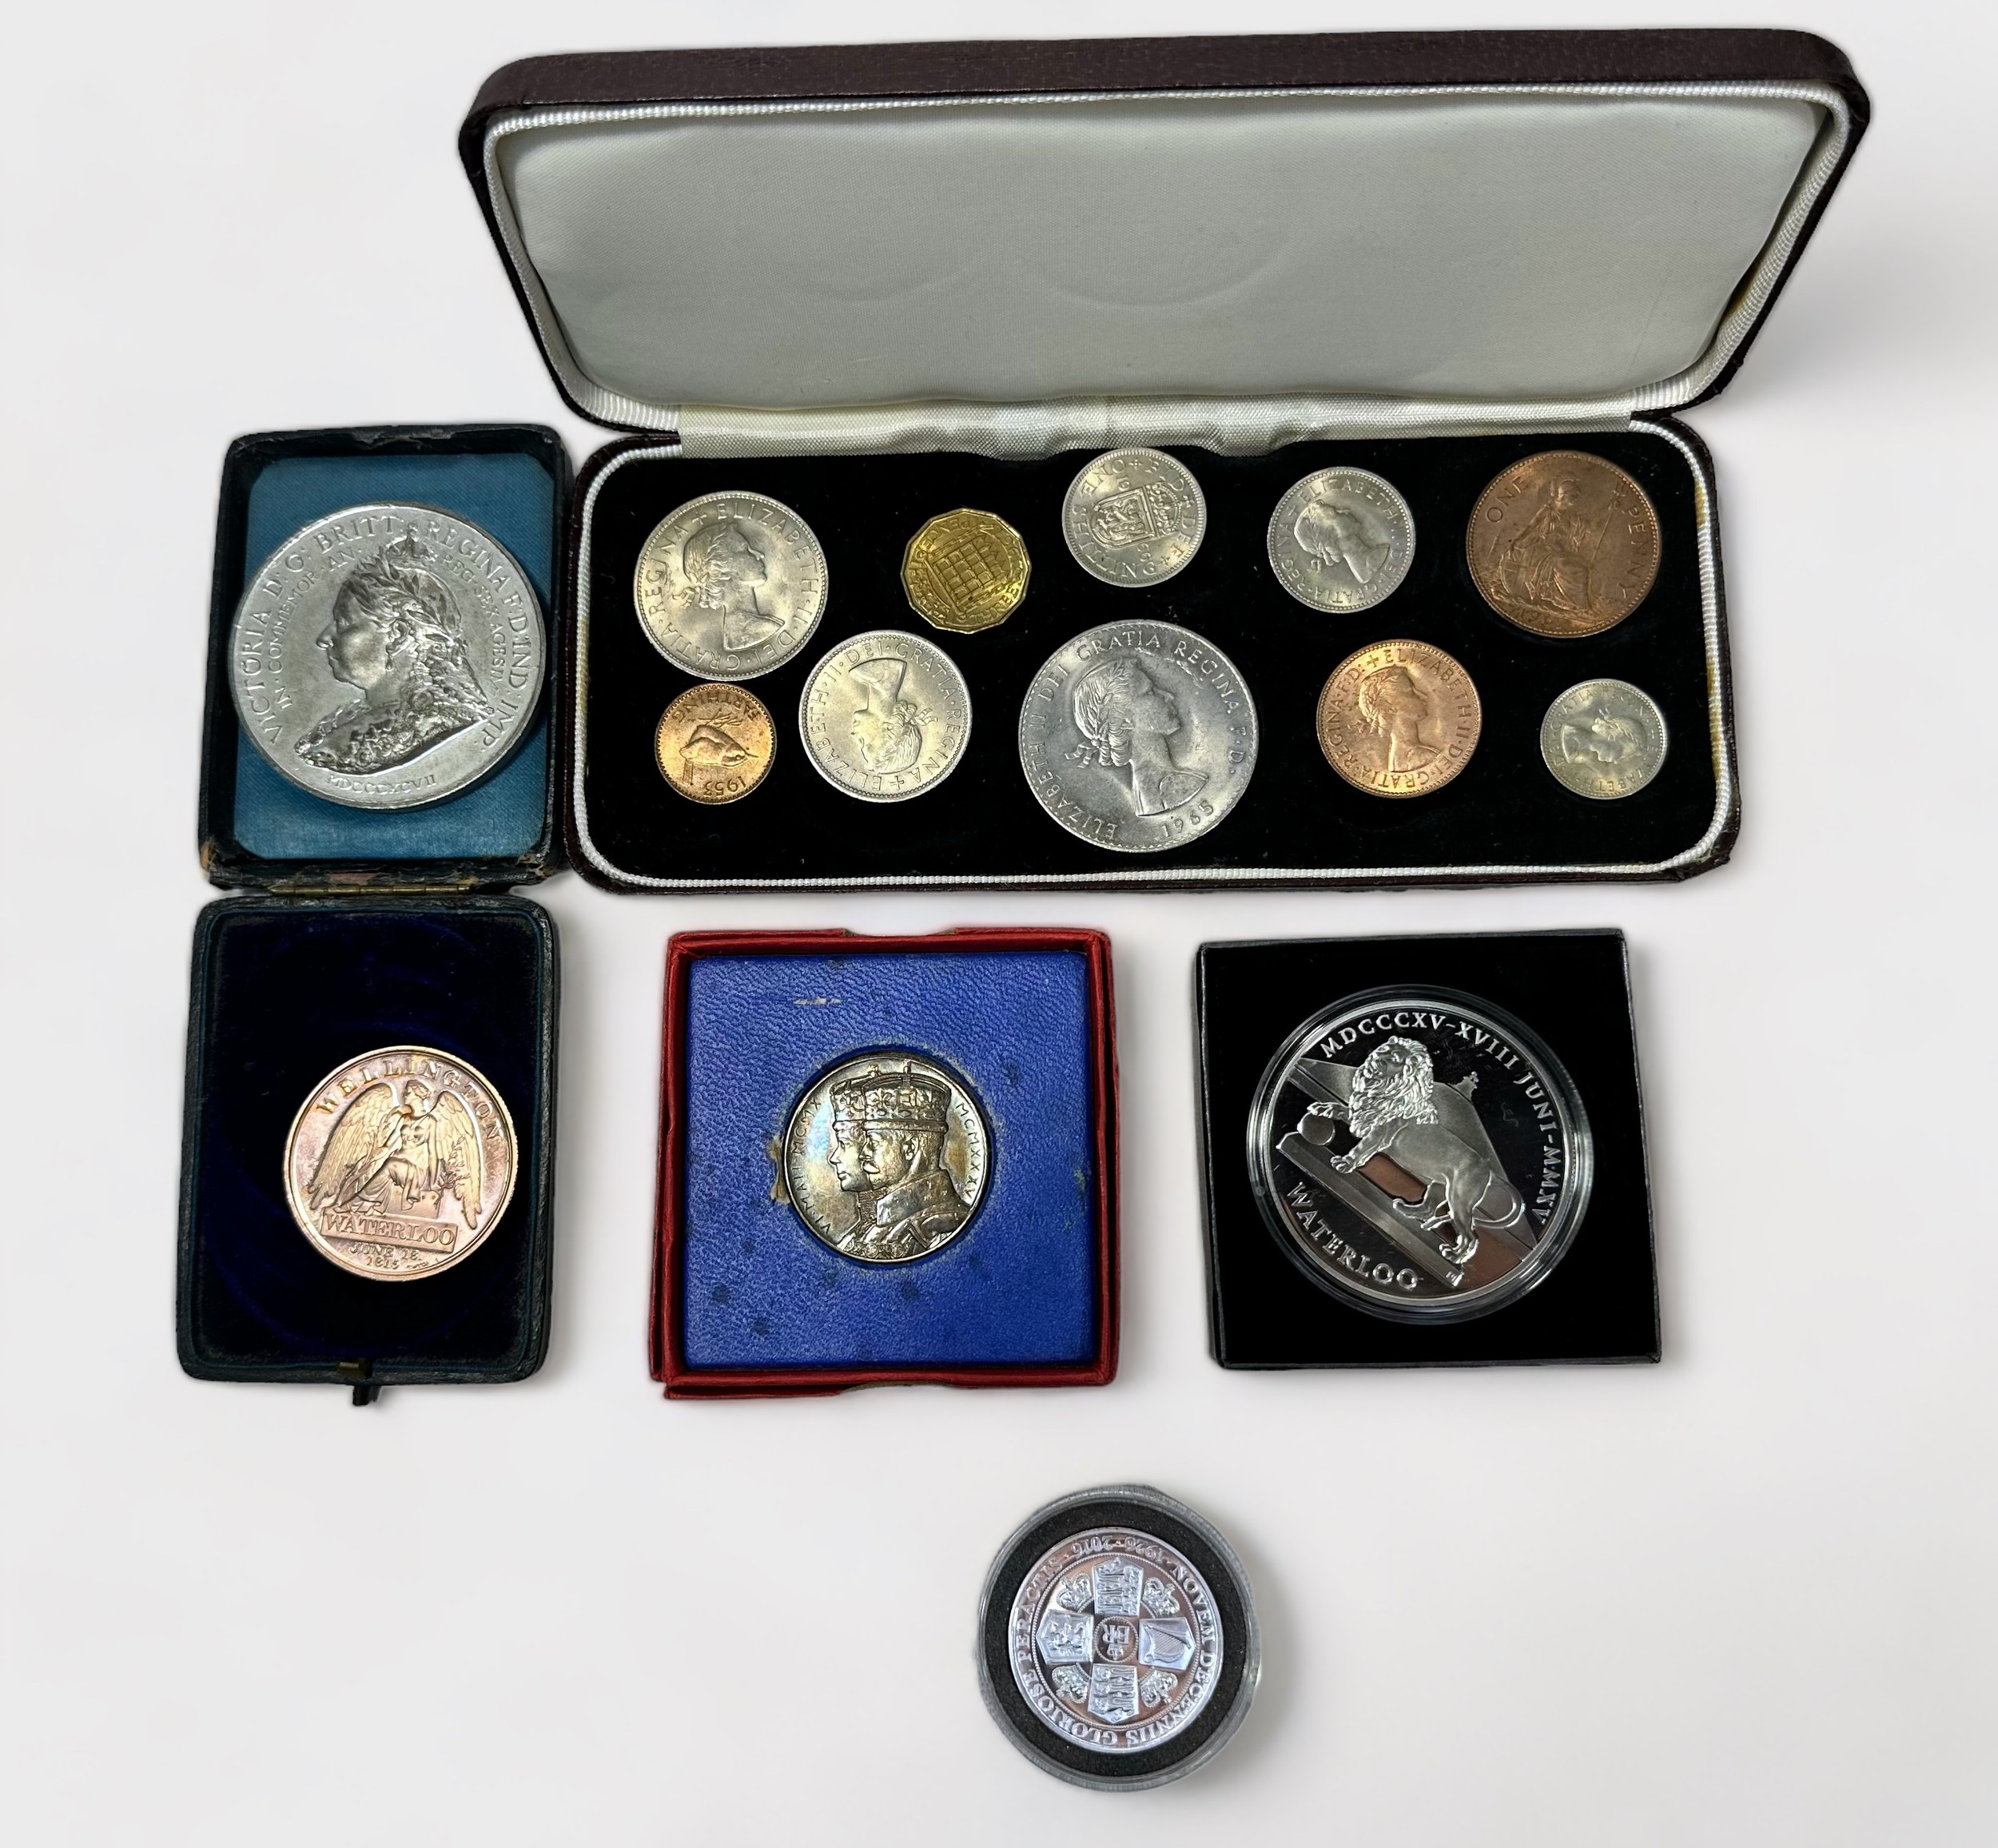 A Waterloo medallion, Ltd edition, bronze layed with pure platinum, in clear plastic capsule, box